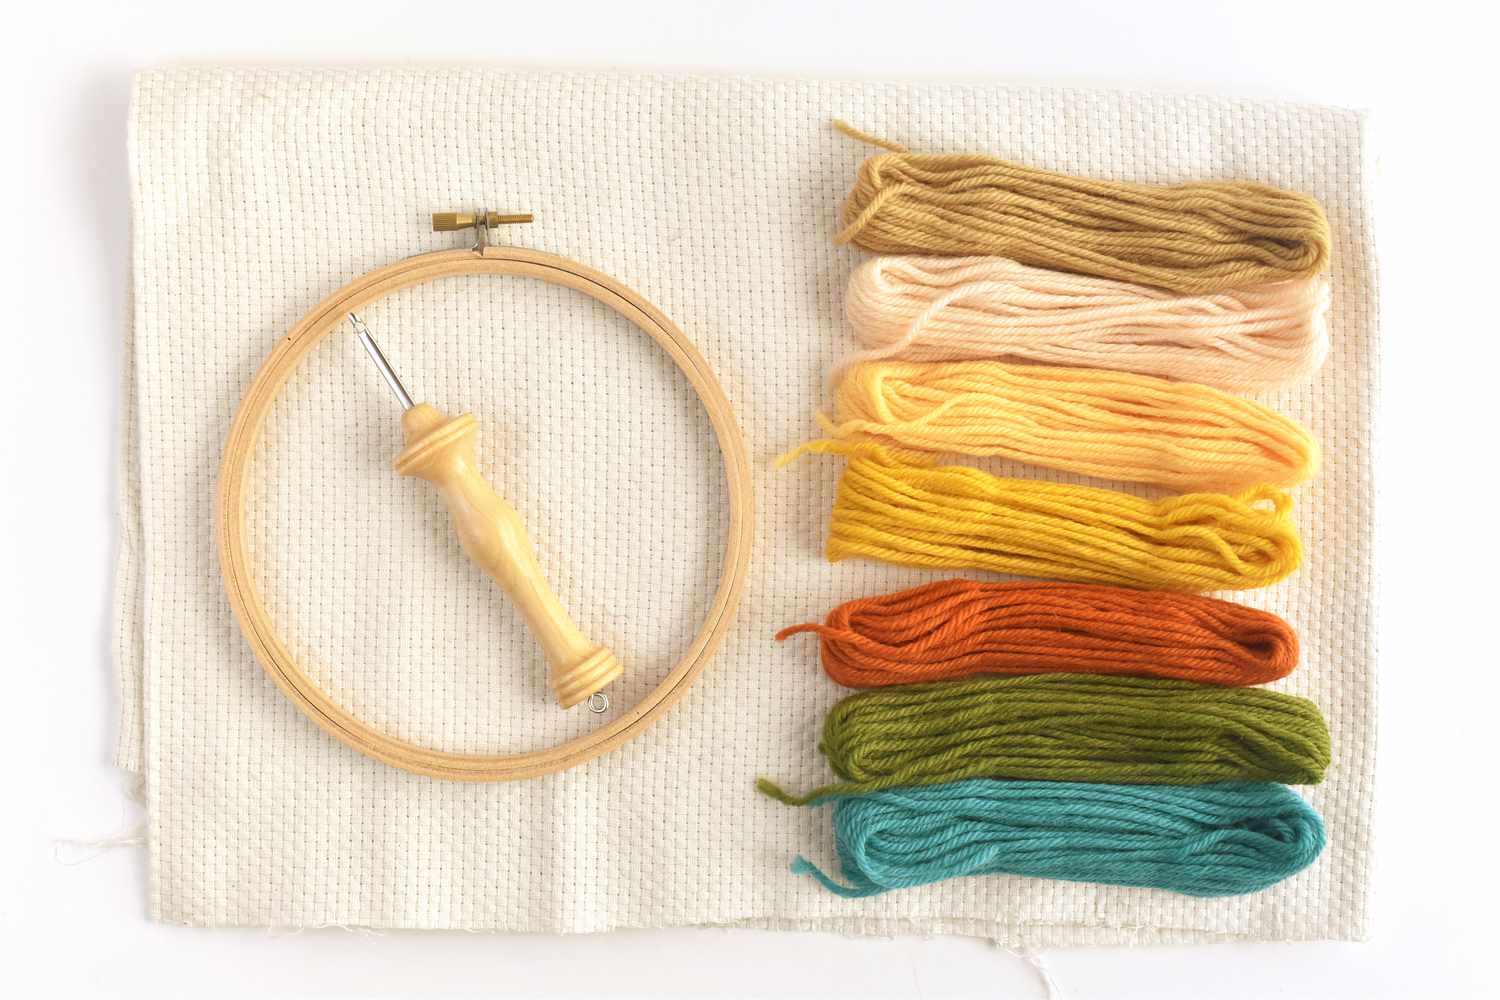 Punch Needle Embroidery